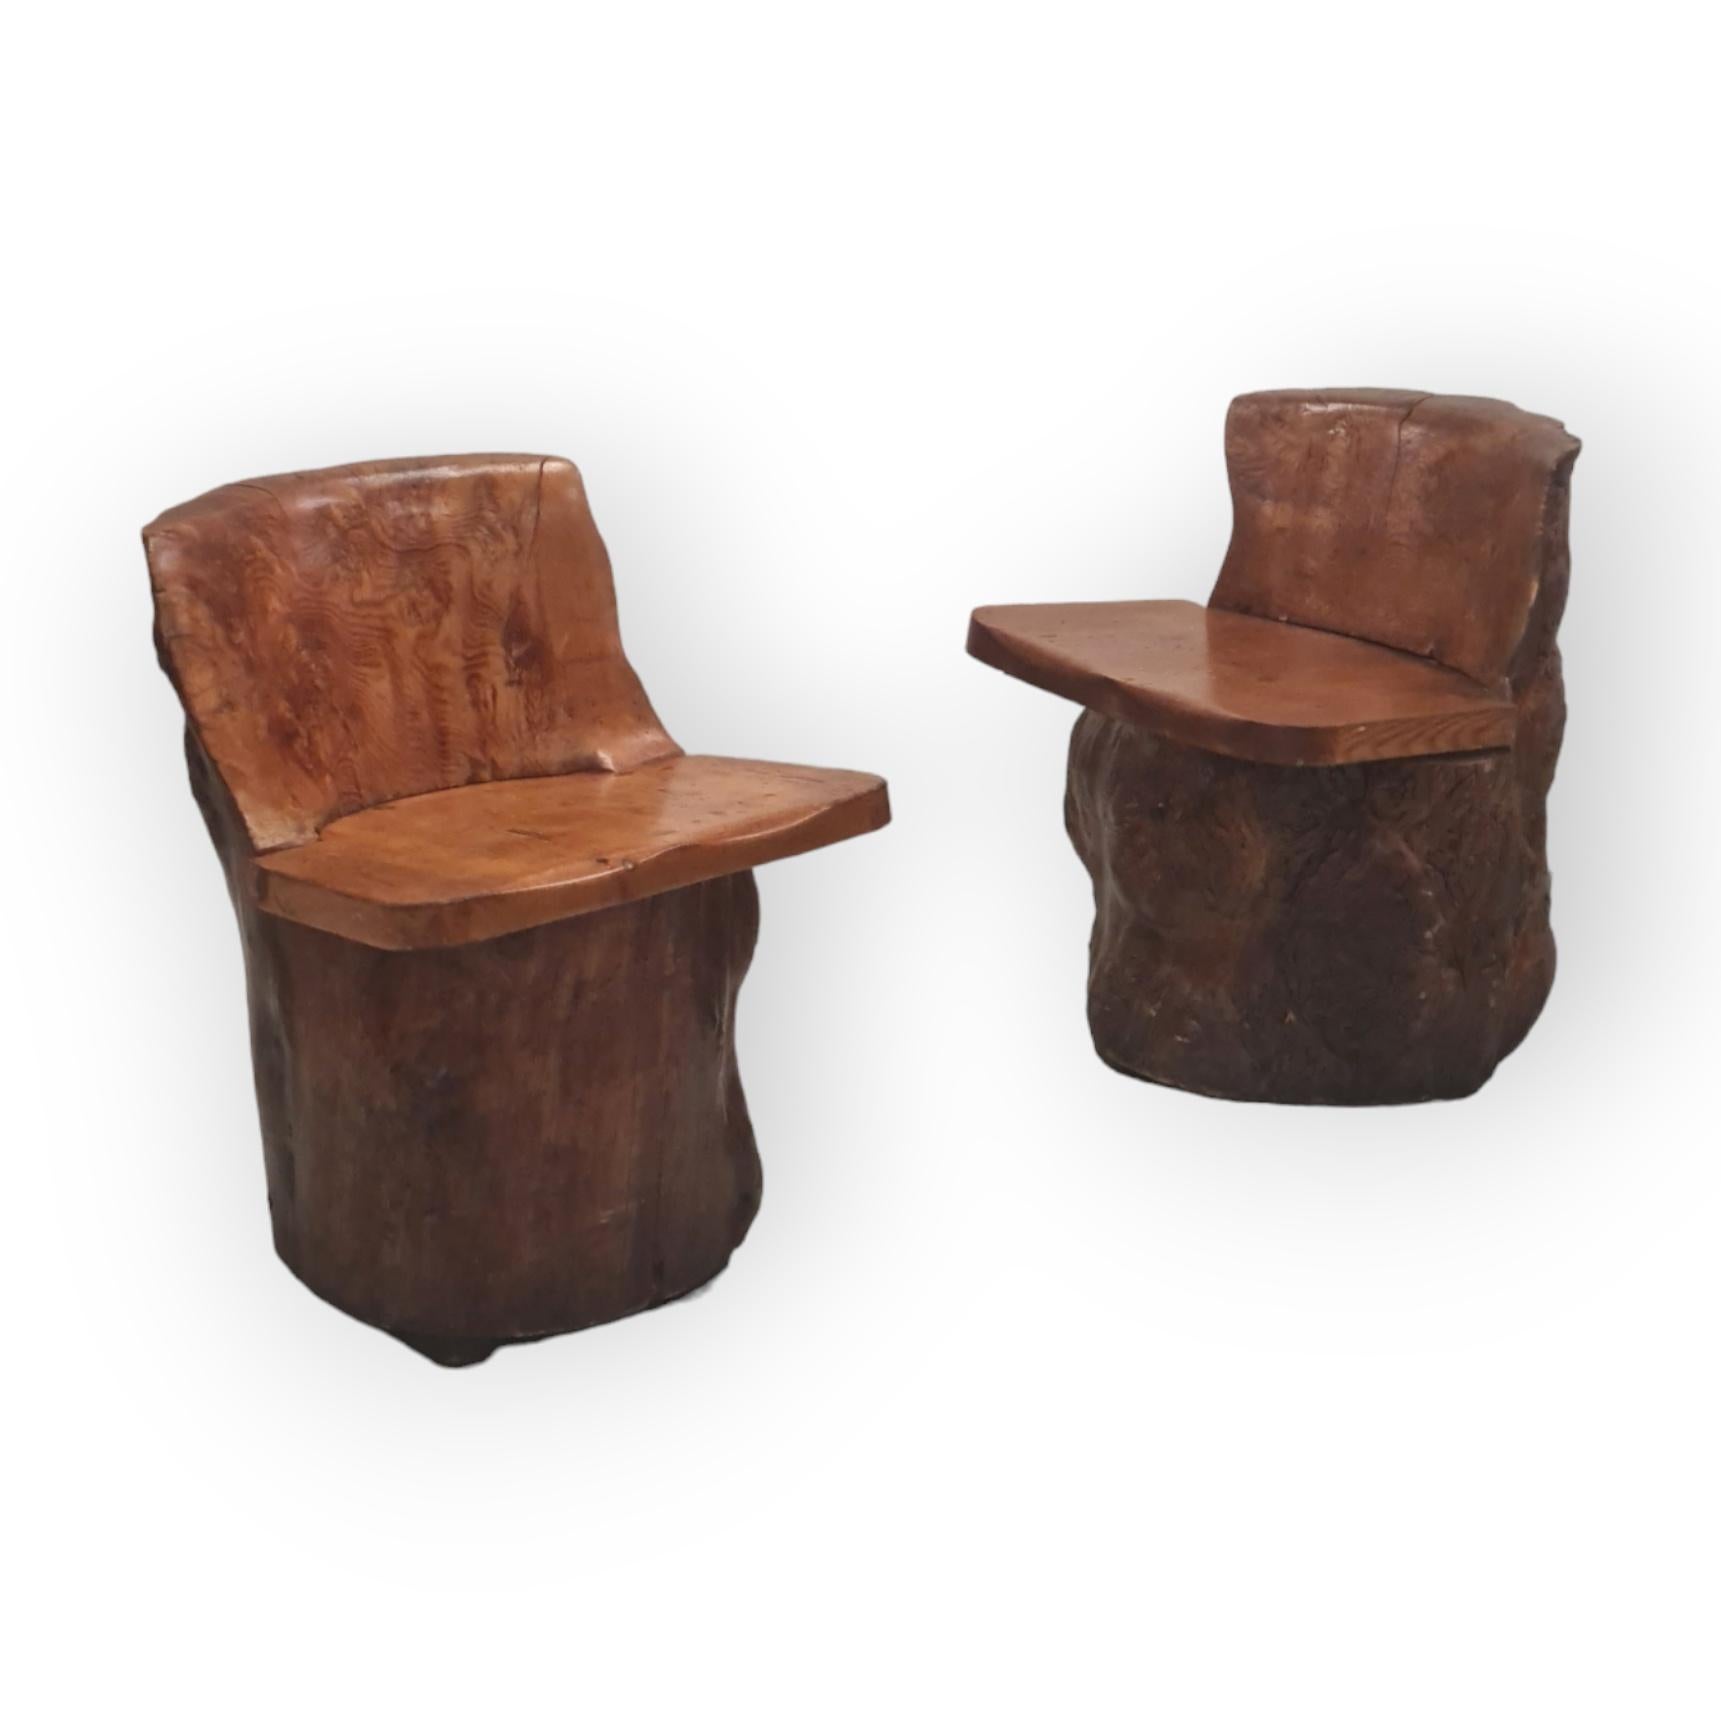 Gorgeous Pair of Carved Finnish Tree Trunk Chairs